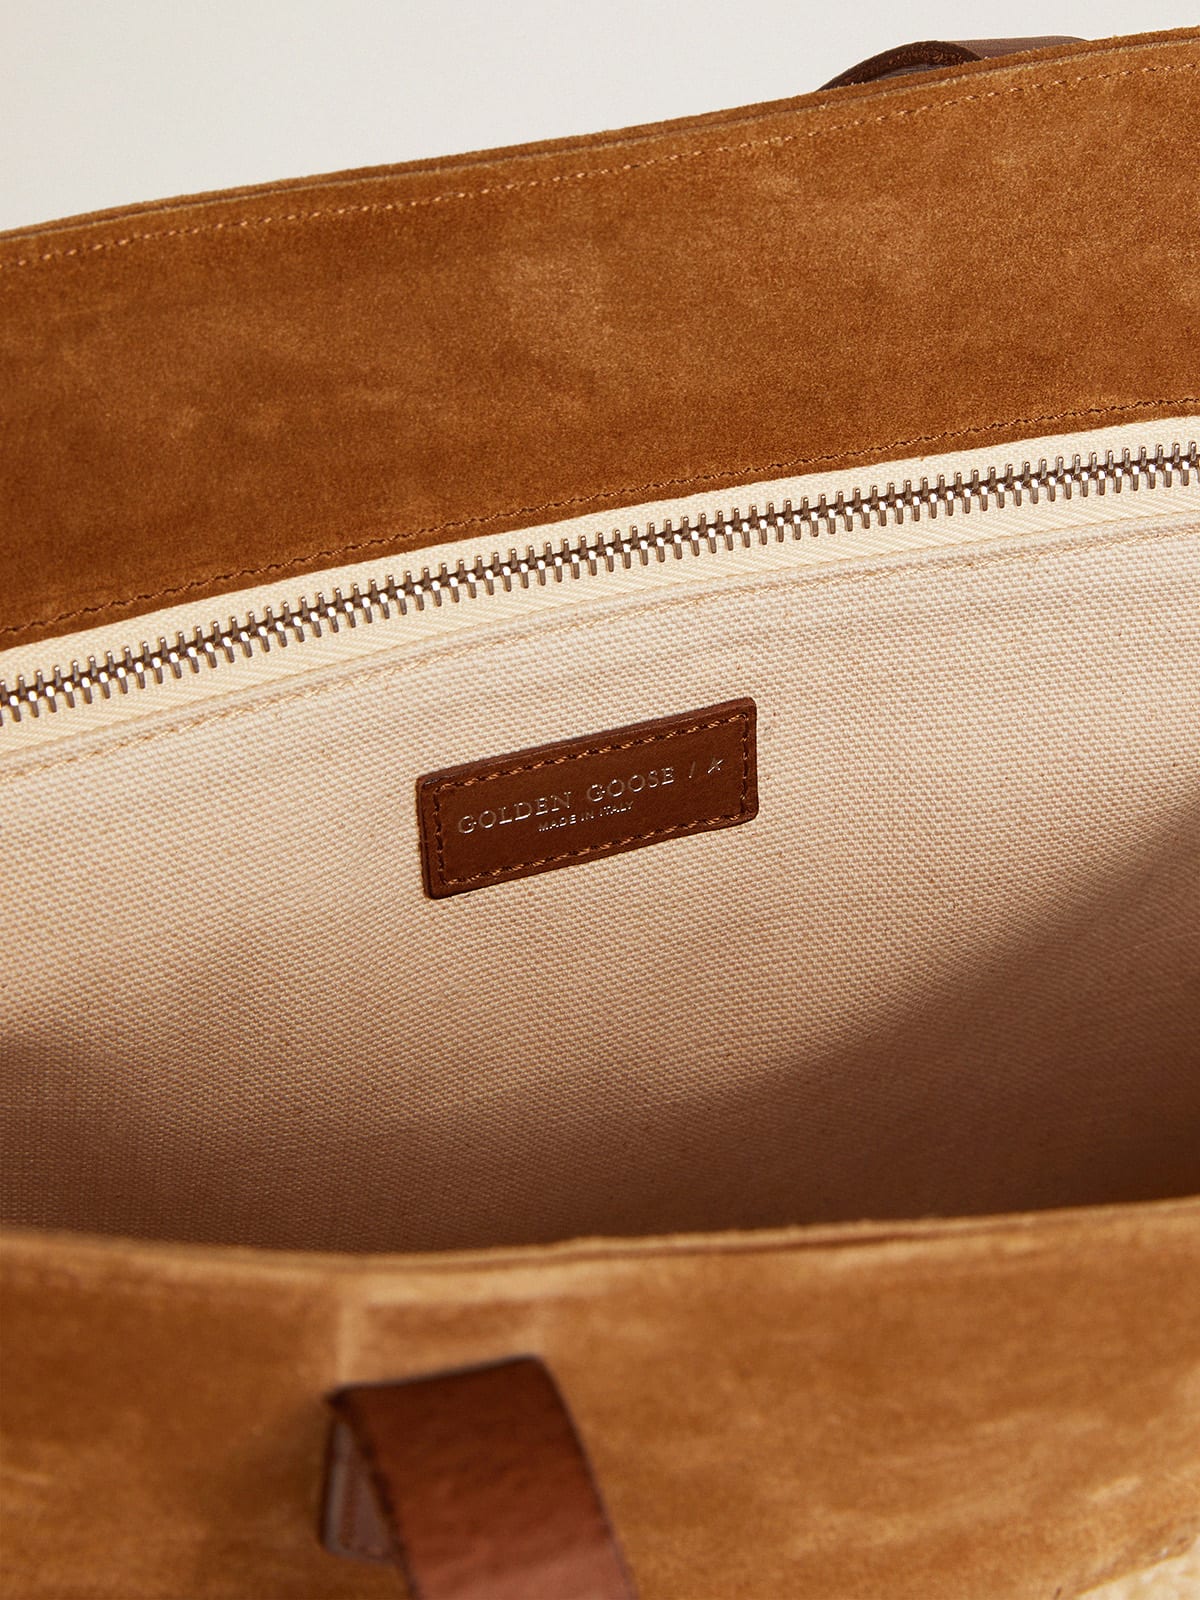 Golden Goose - North-South California Bag in suede leather with shearling in 